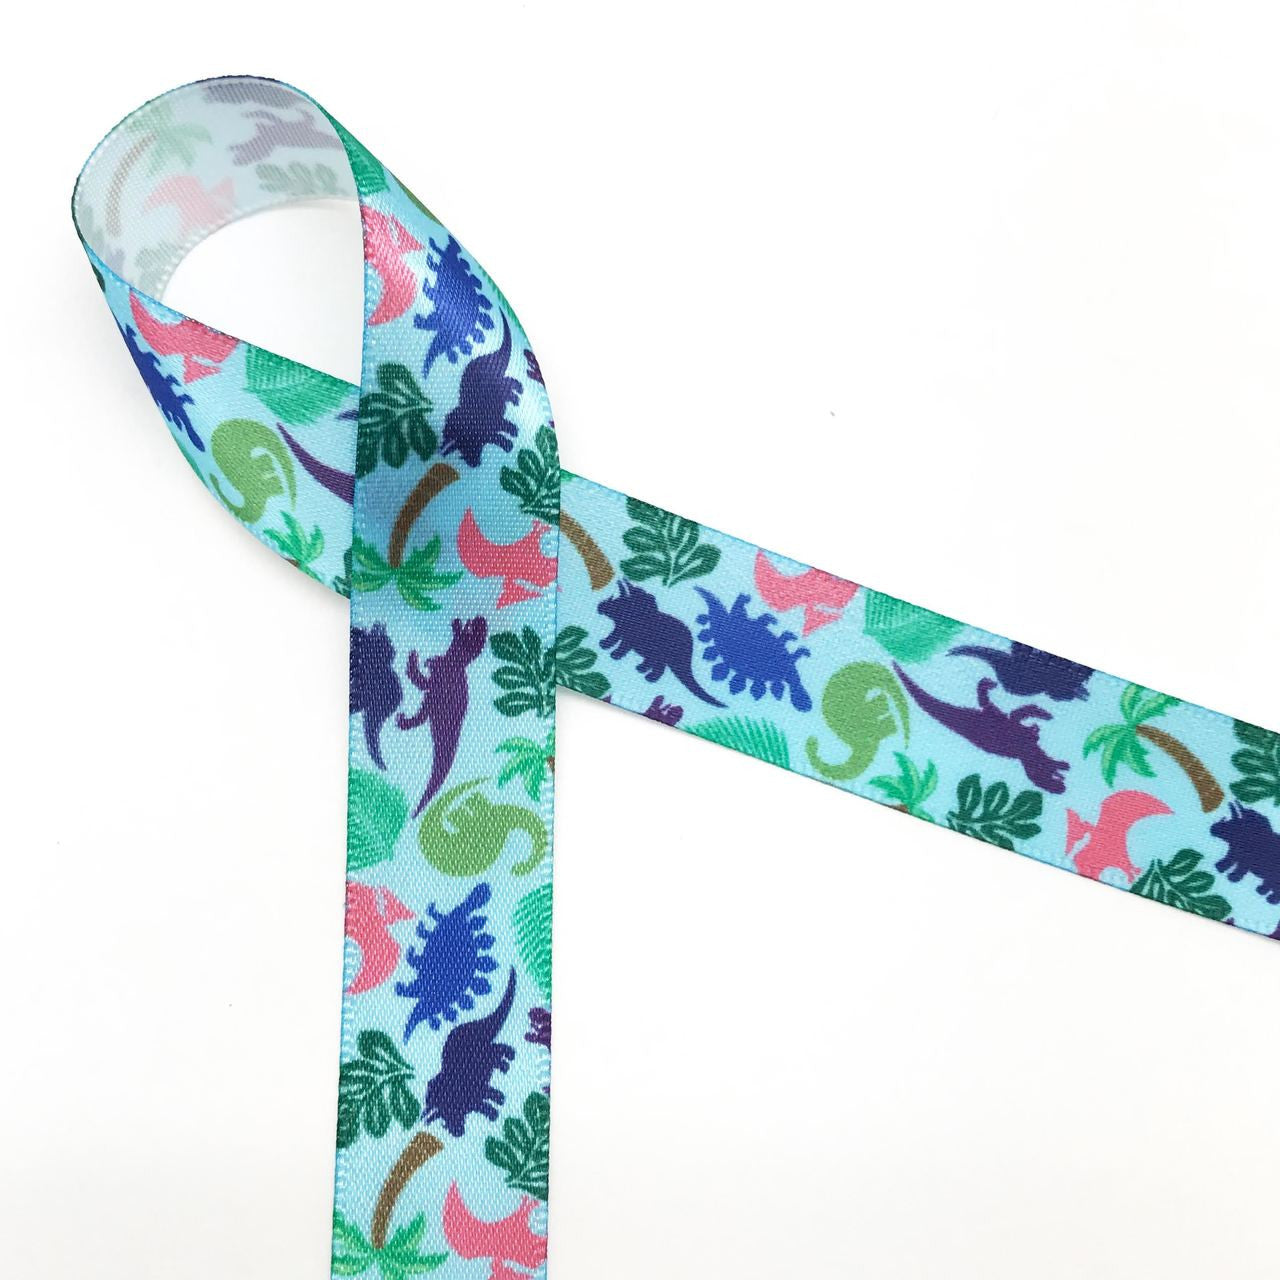 Dinosaur ribbon printed on 5/8" lt. blue ribbon incorporate all the creatures of the Jurassic age! There are Tyrannosaurus Rex, Triceratops, and Pterodactyls and more along with the leafy greens they loved to eat!